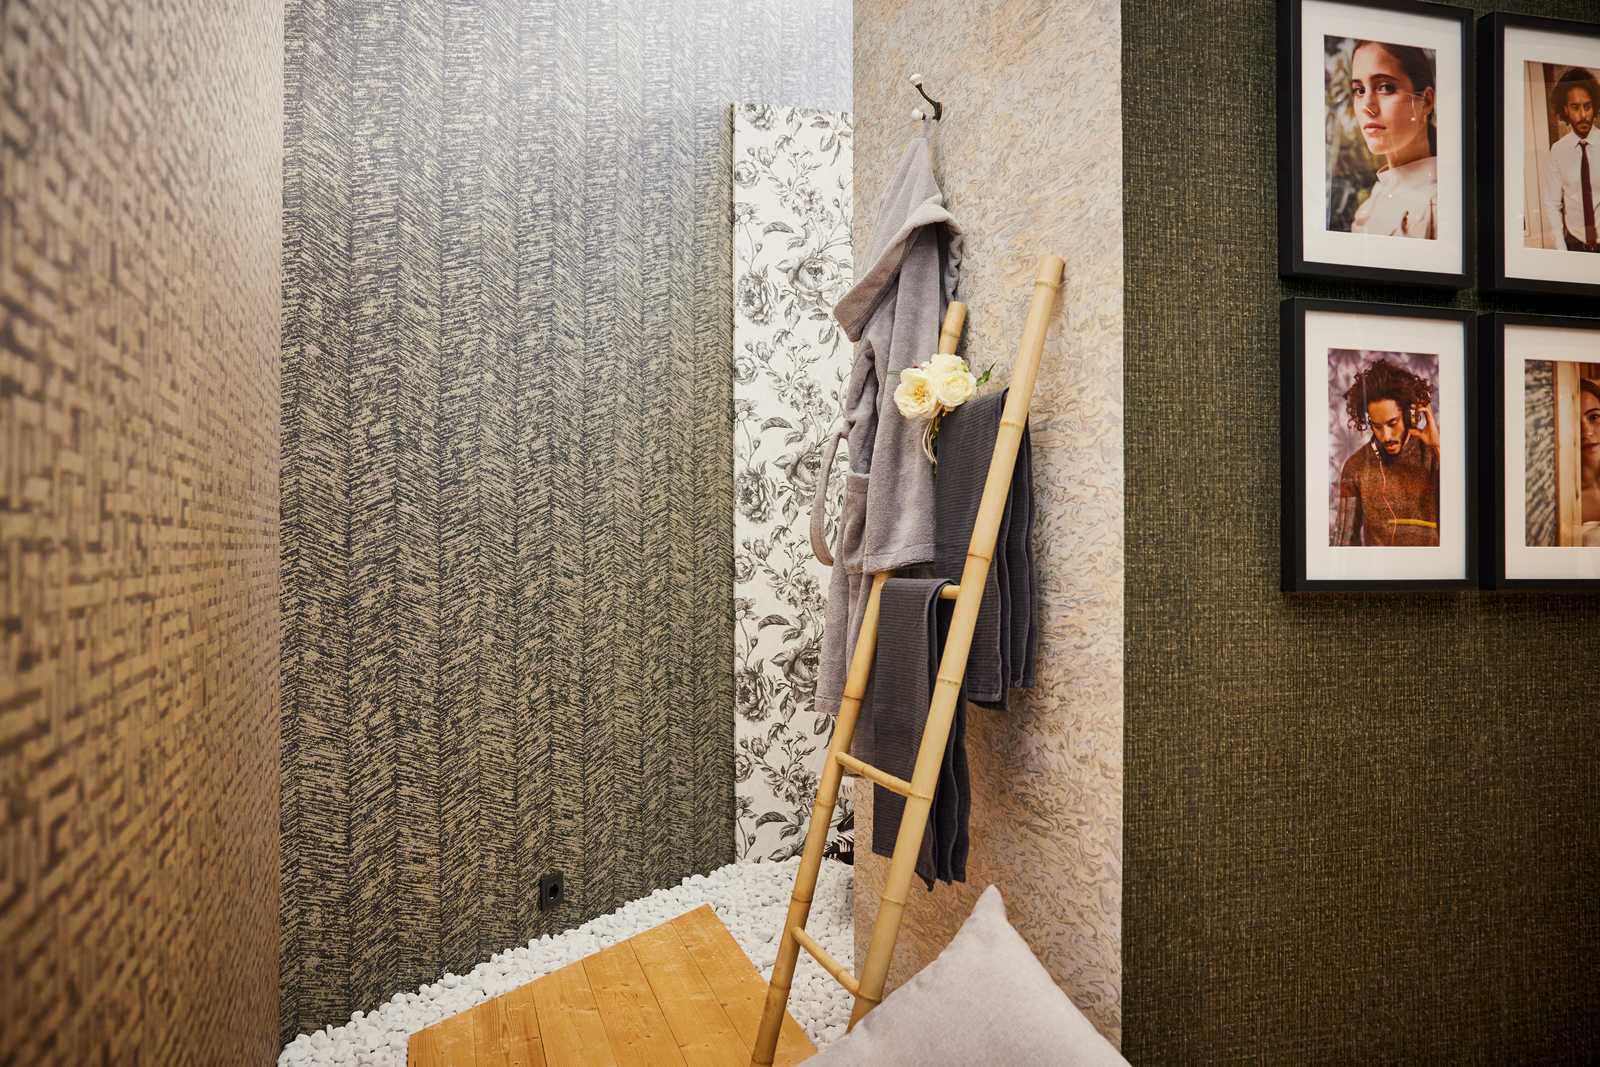             Ethno pattern wallpaper with used design & relief graphics - Brown, Metallic
        